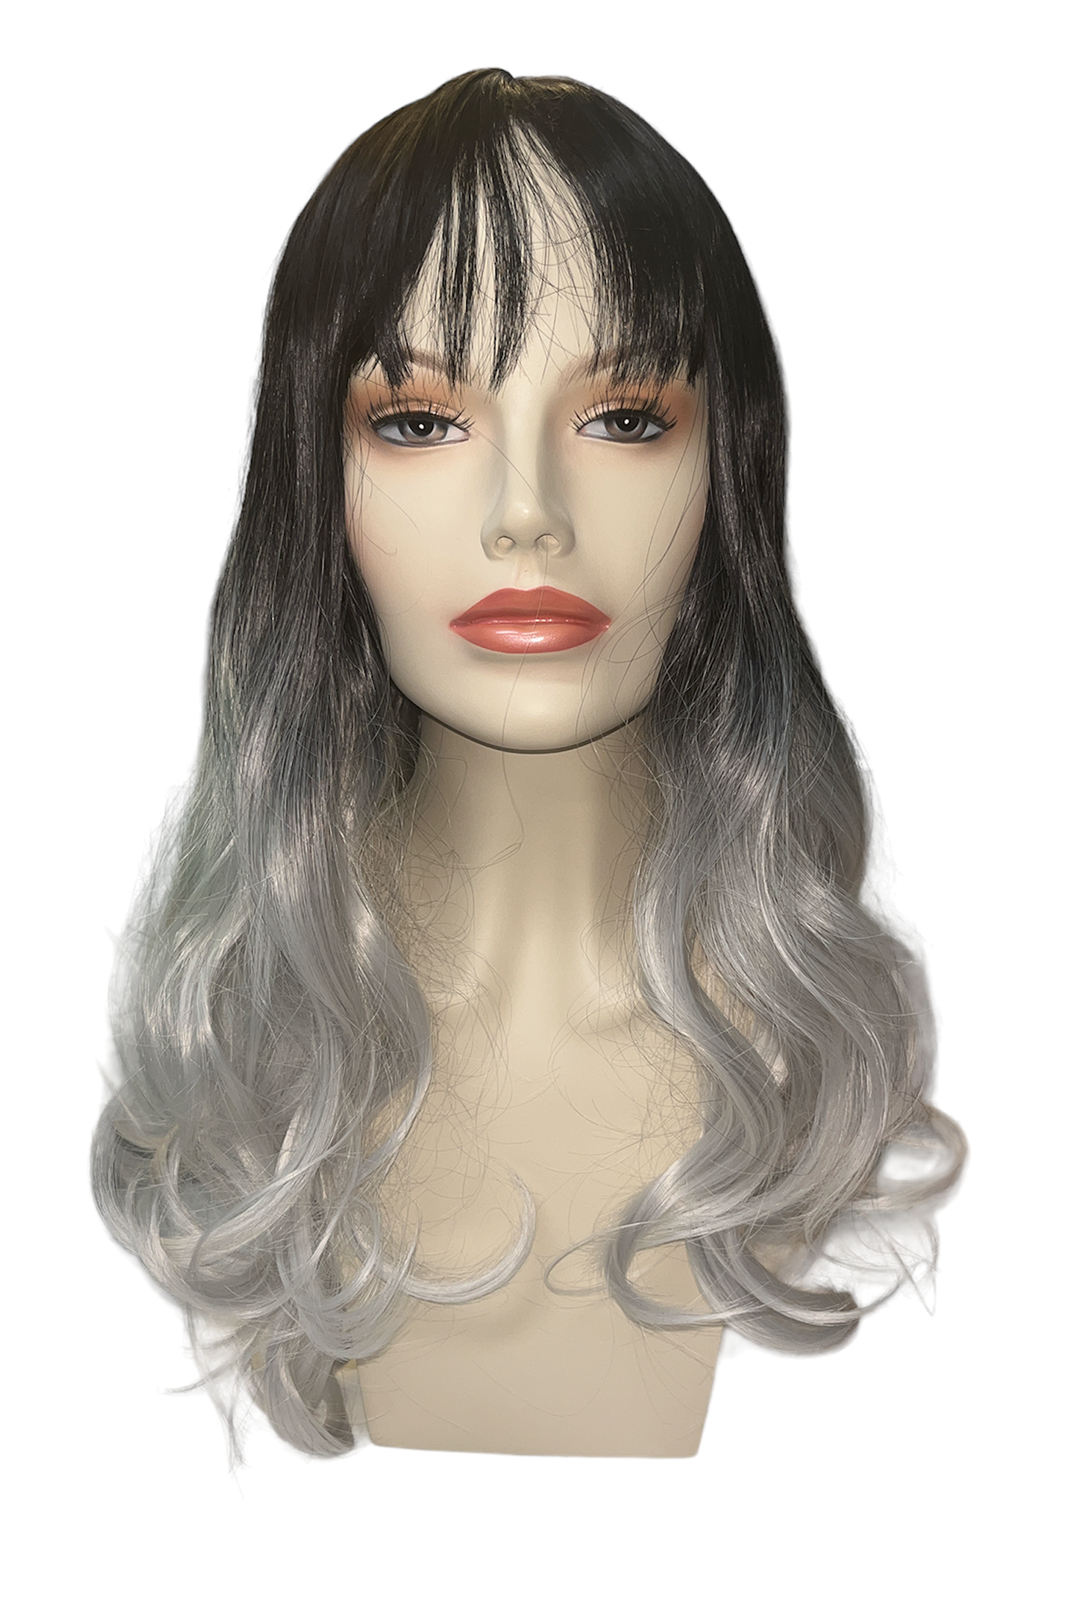 Long Curly Black to Platinum Silver Ombre Wig